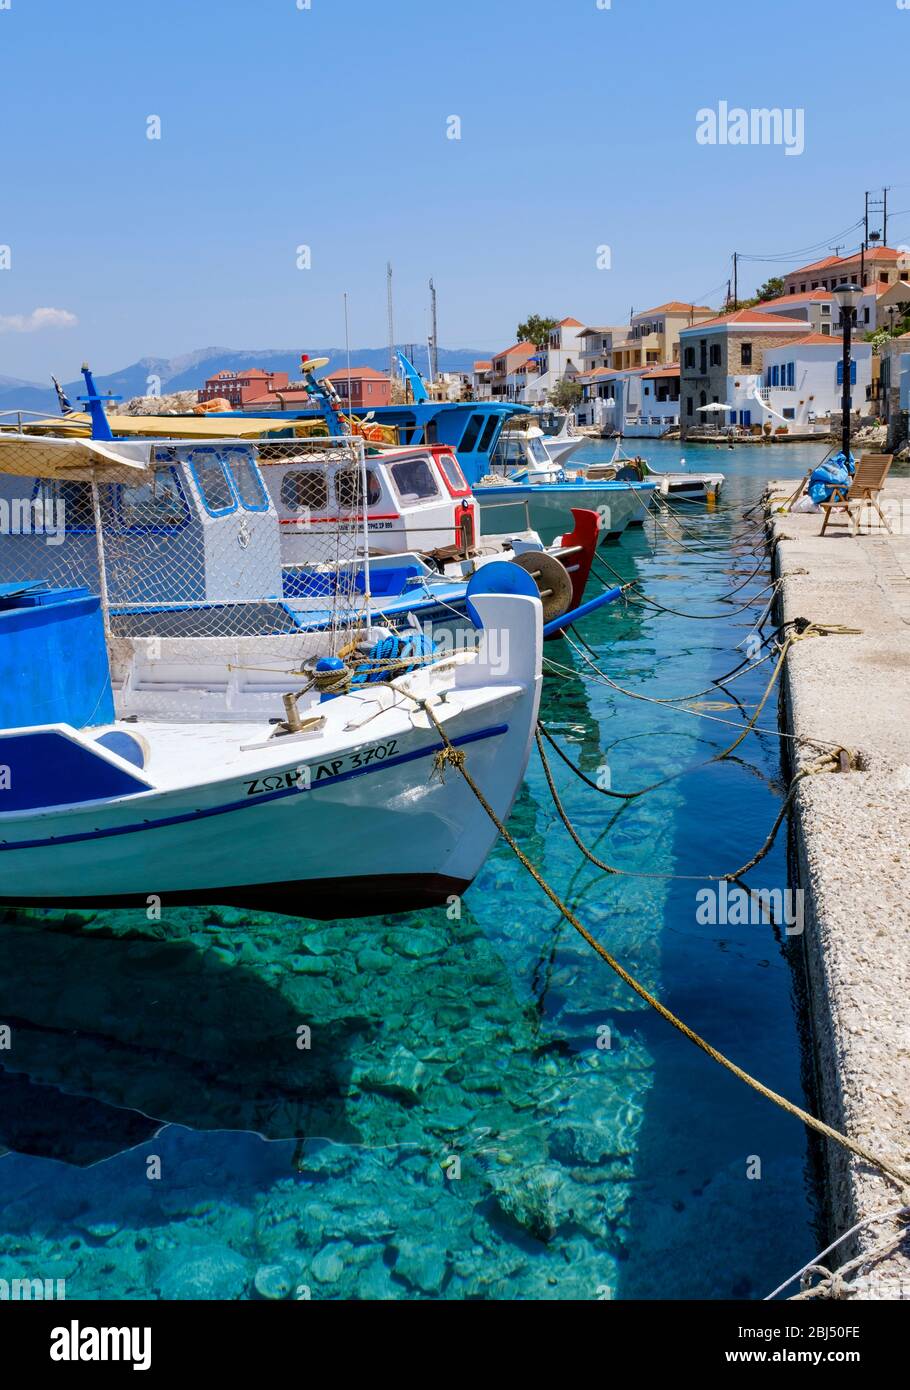 Boats in a row in the clear waters of Halki harbour. Stock Photo